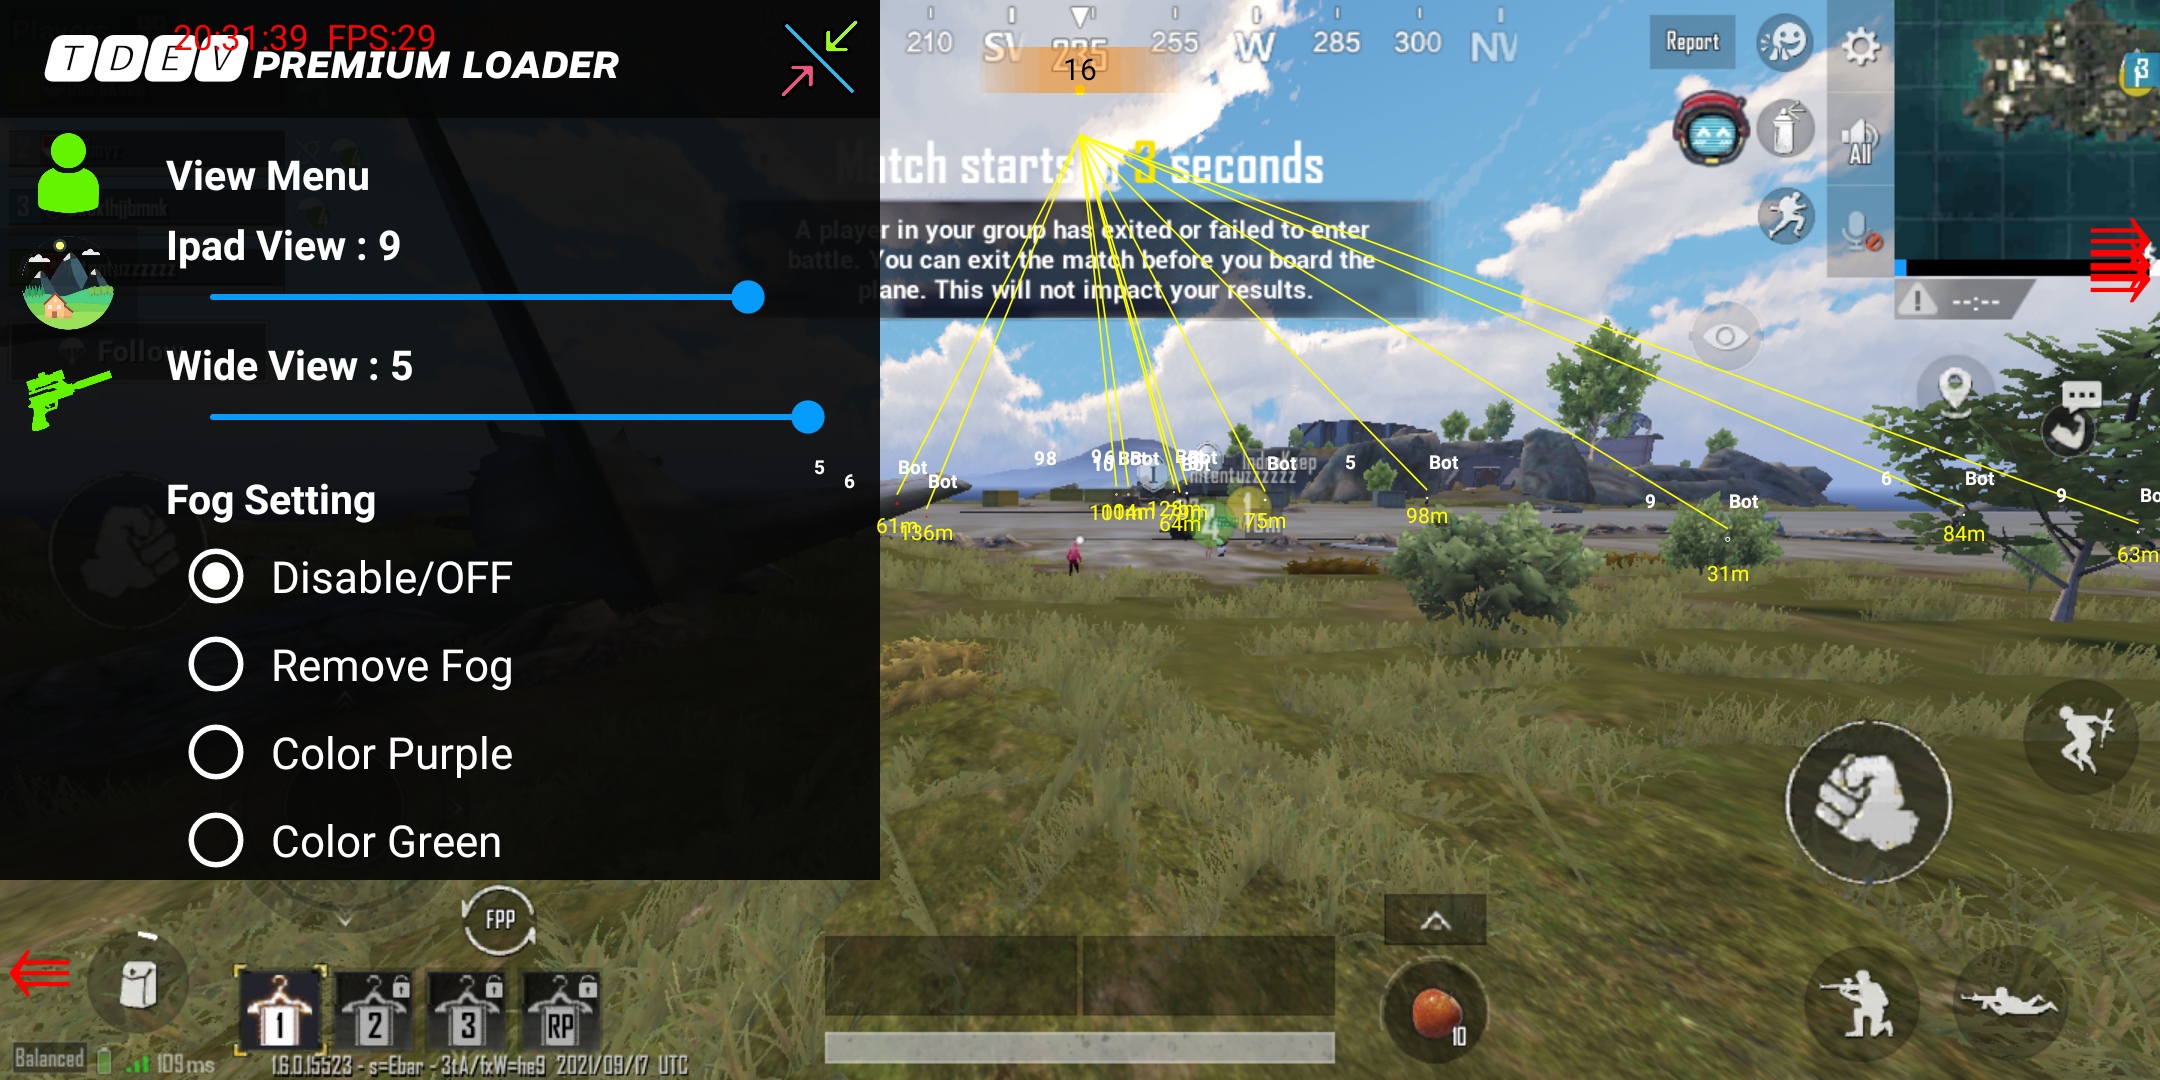 You are currently viewing PUBG Mobile 1.6.0 Premium Loader Hack C1S2